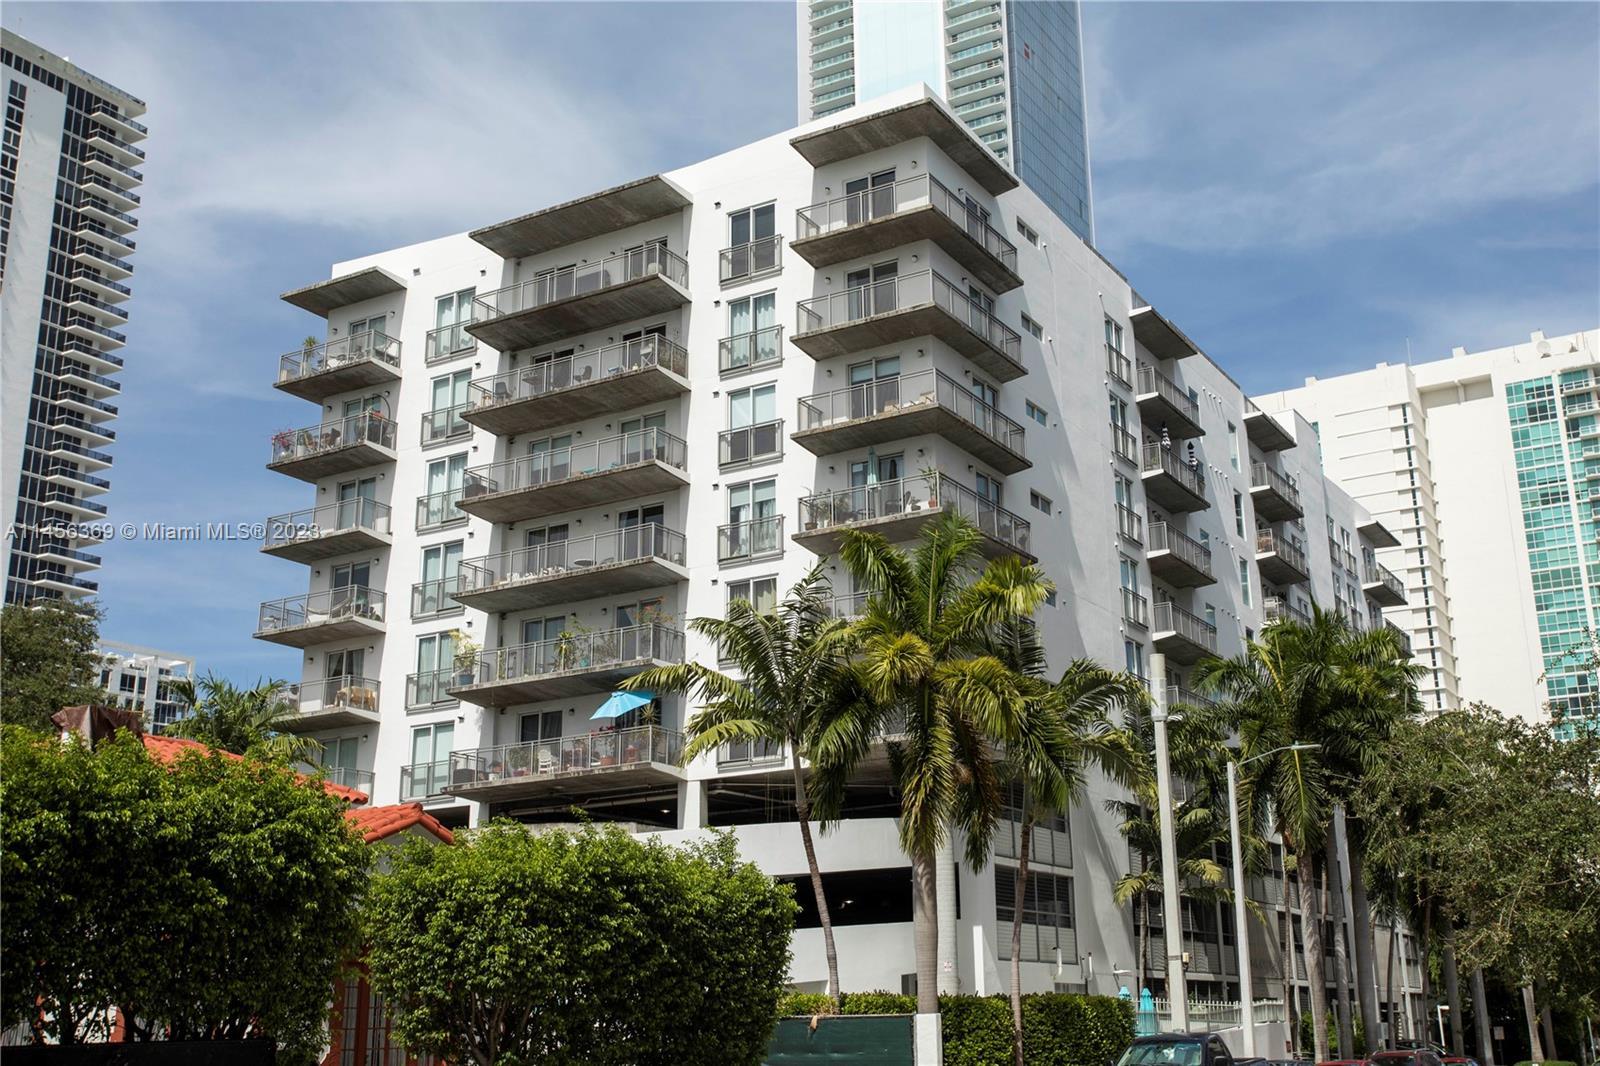 Presenting an exceptional 1-bedroom, 1.5-bathroom condo in the heart of Miami's Edgewater. This soph